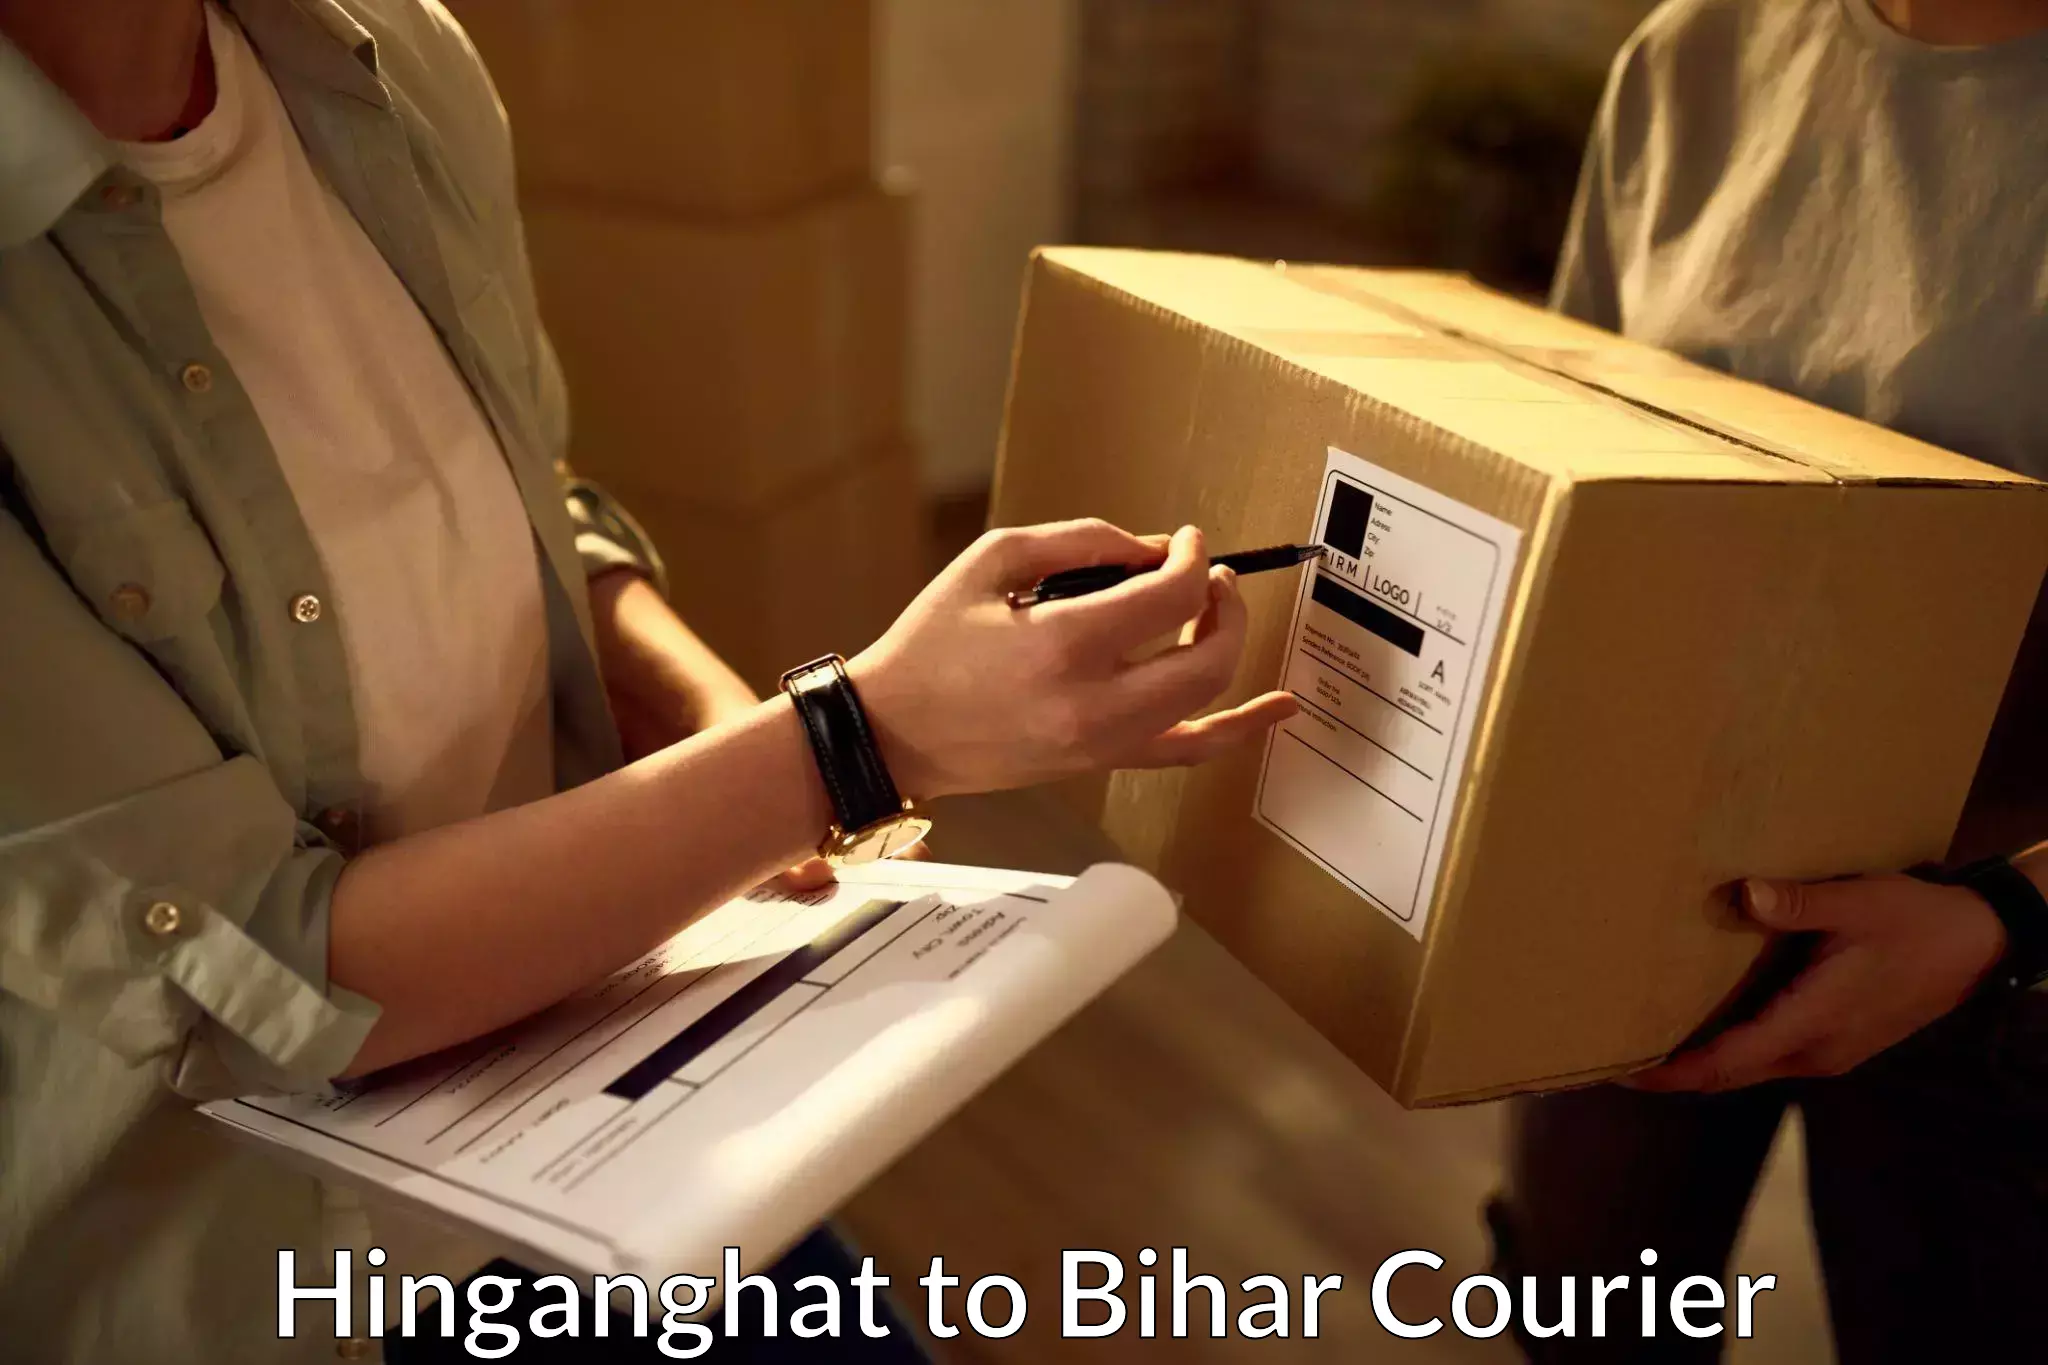 Courier service partnerships in Hinganghat to Palasi Araria